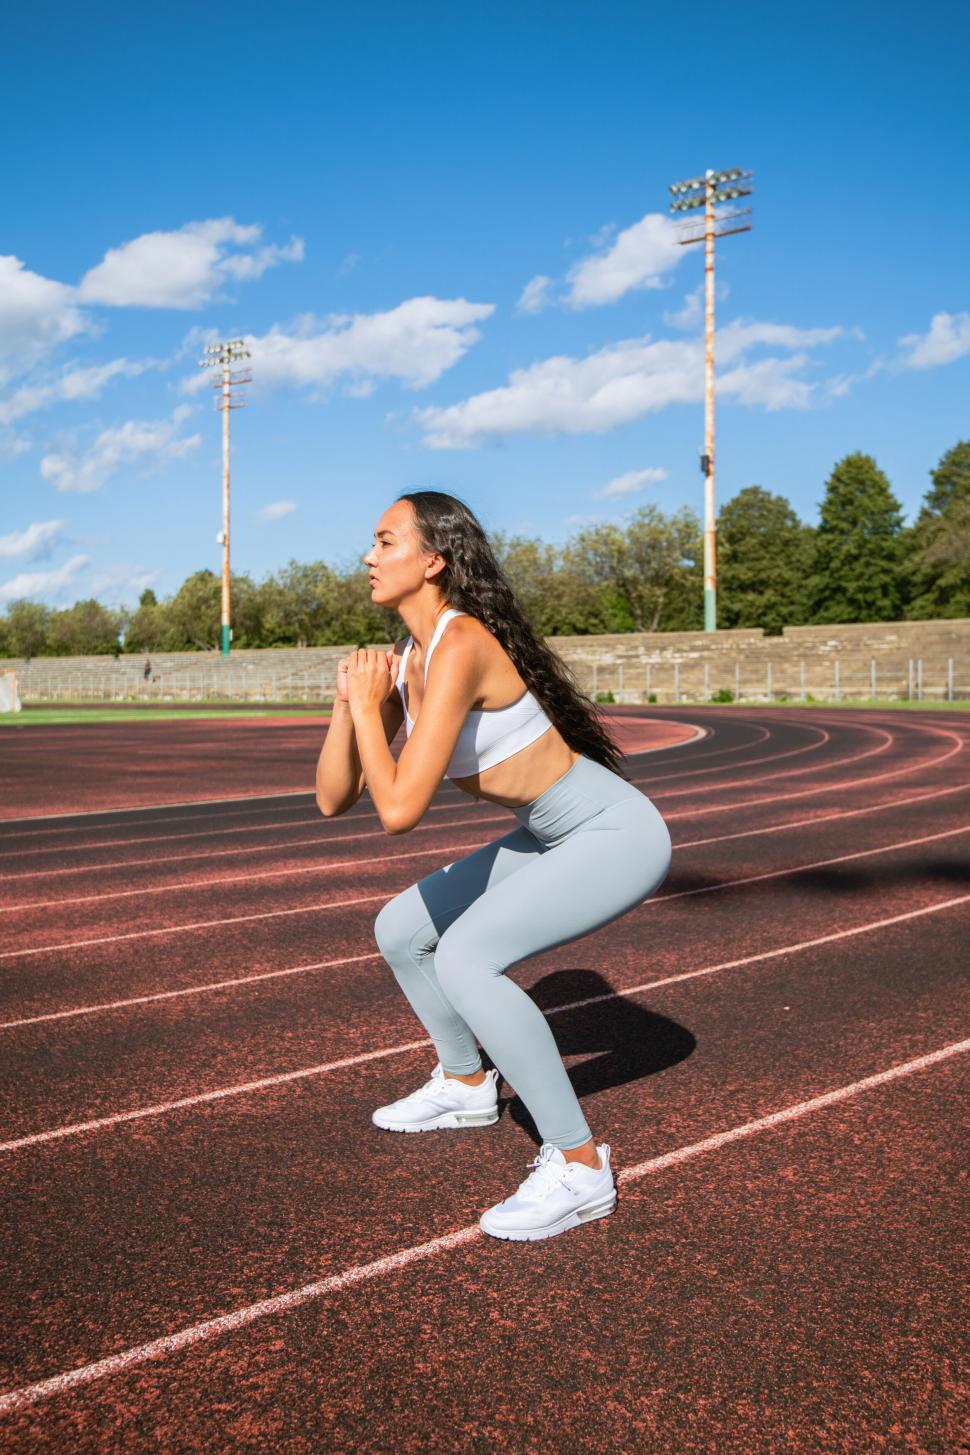 Free Image of Athletic woman in starting position on track 